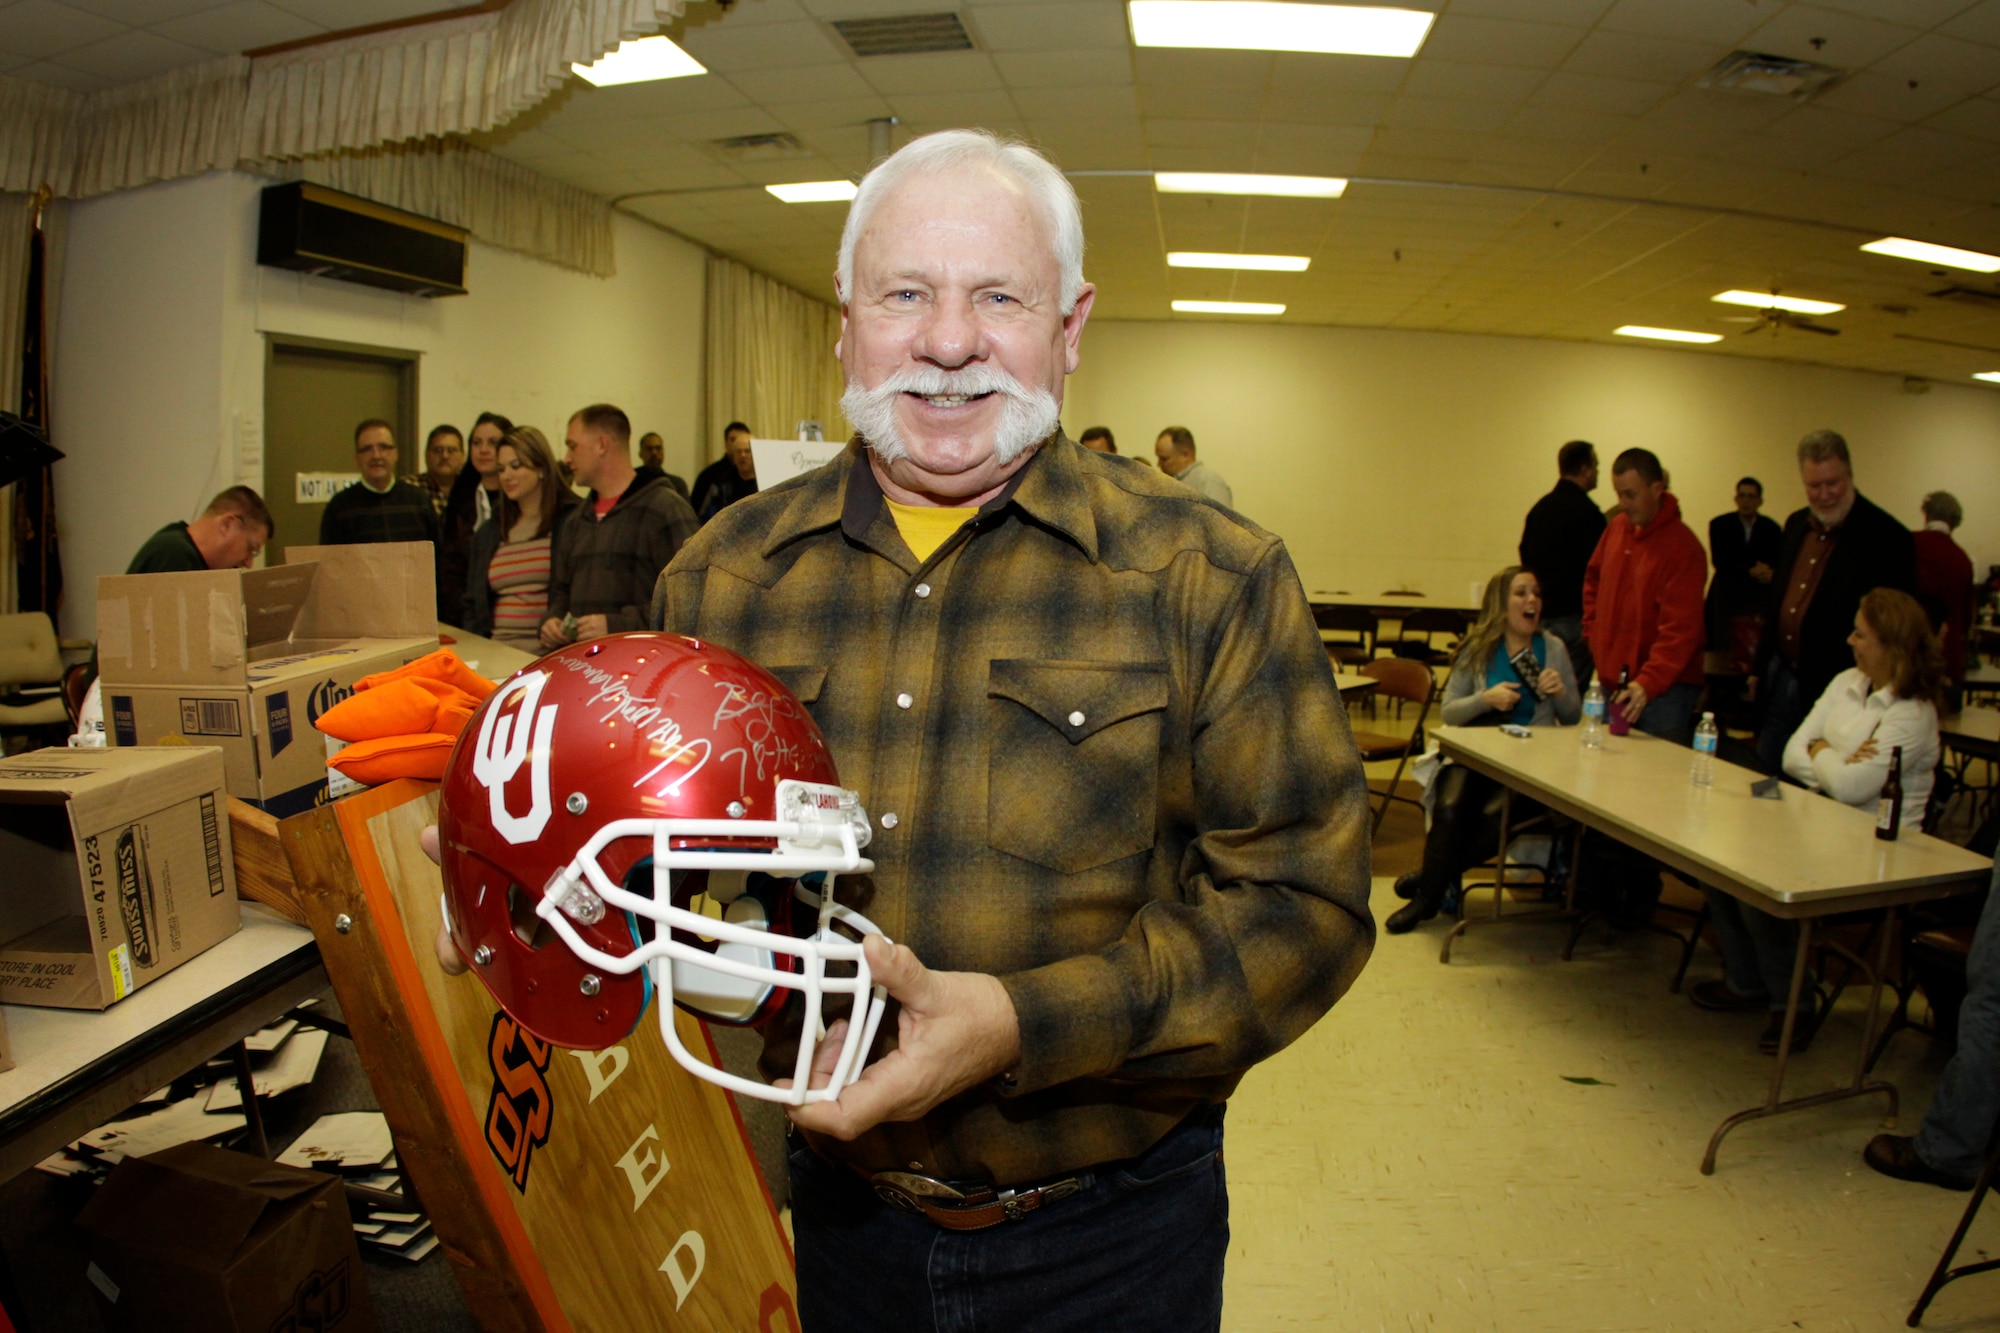 Former 507th Air Refueling Wing Command Chief Bob Kellington shows off his new football helmet during the Operation Holiday Spirit fund-raiser at the Del City American Legion, Dec. 7. (U.S. Air Force Photo/Staff Sgt. Caleb Wanzer) 